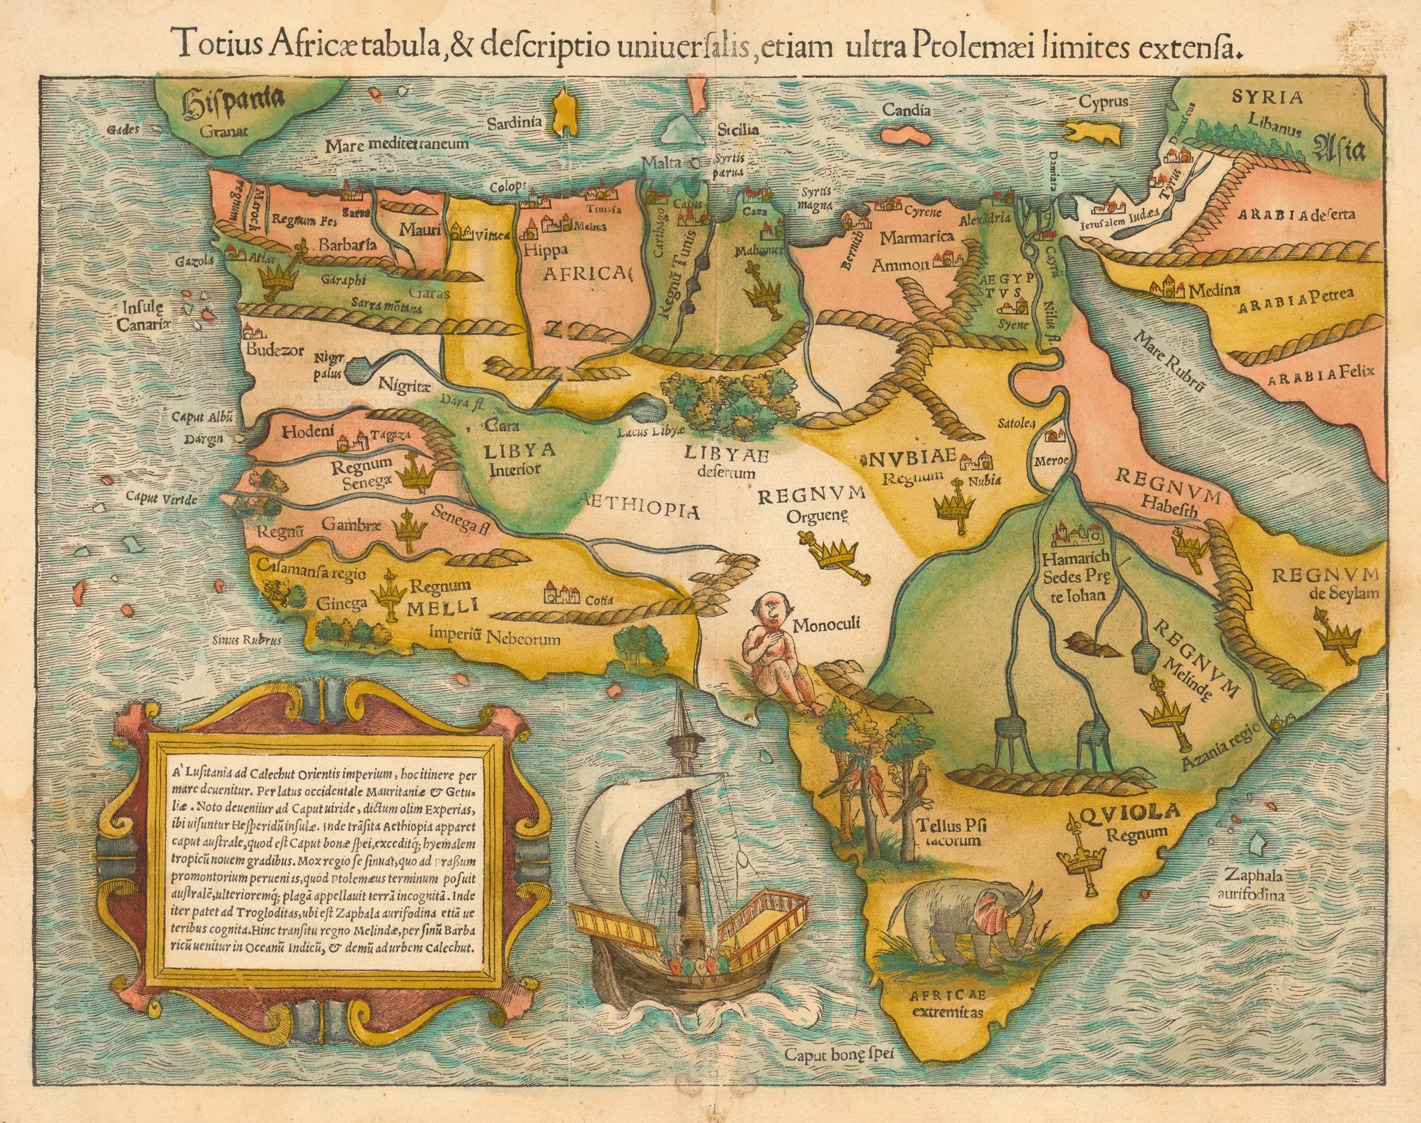 One of the earliest depictions of the entire continent, this fanciful map provided much misinformation about Africa. It was made as an itinerary for early navigators on how to circumnavigate it. Sebastian Münster, “Totius Africæ tabula  & descriptio uniuersalis etiam ultra Ptolemaei limites extensa” (Basel: 1542), https://catalog.afriterra.org/map/463.